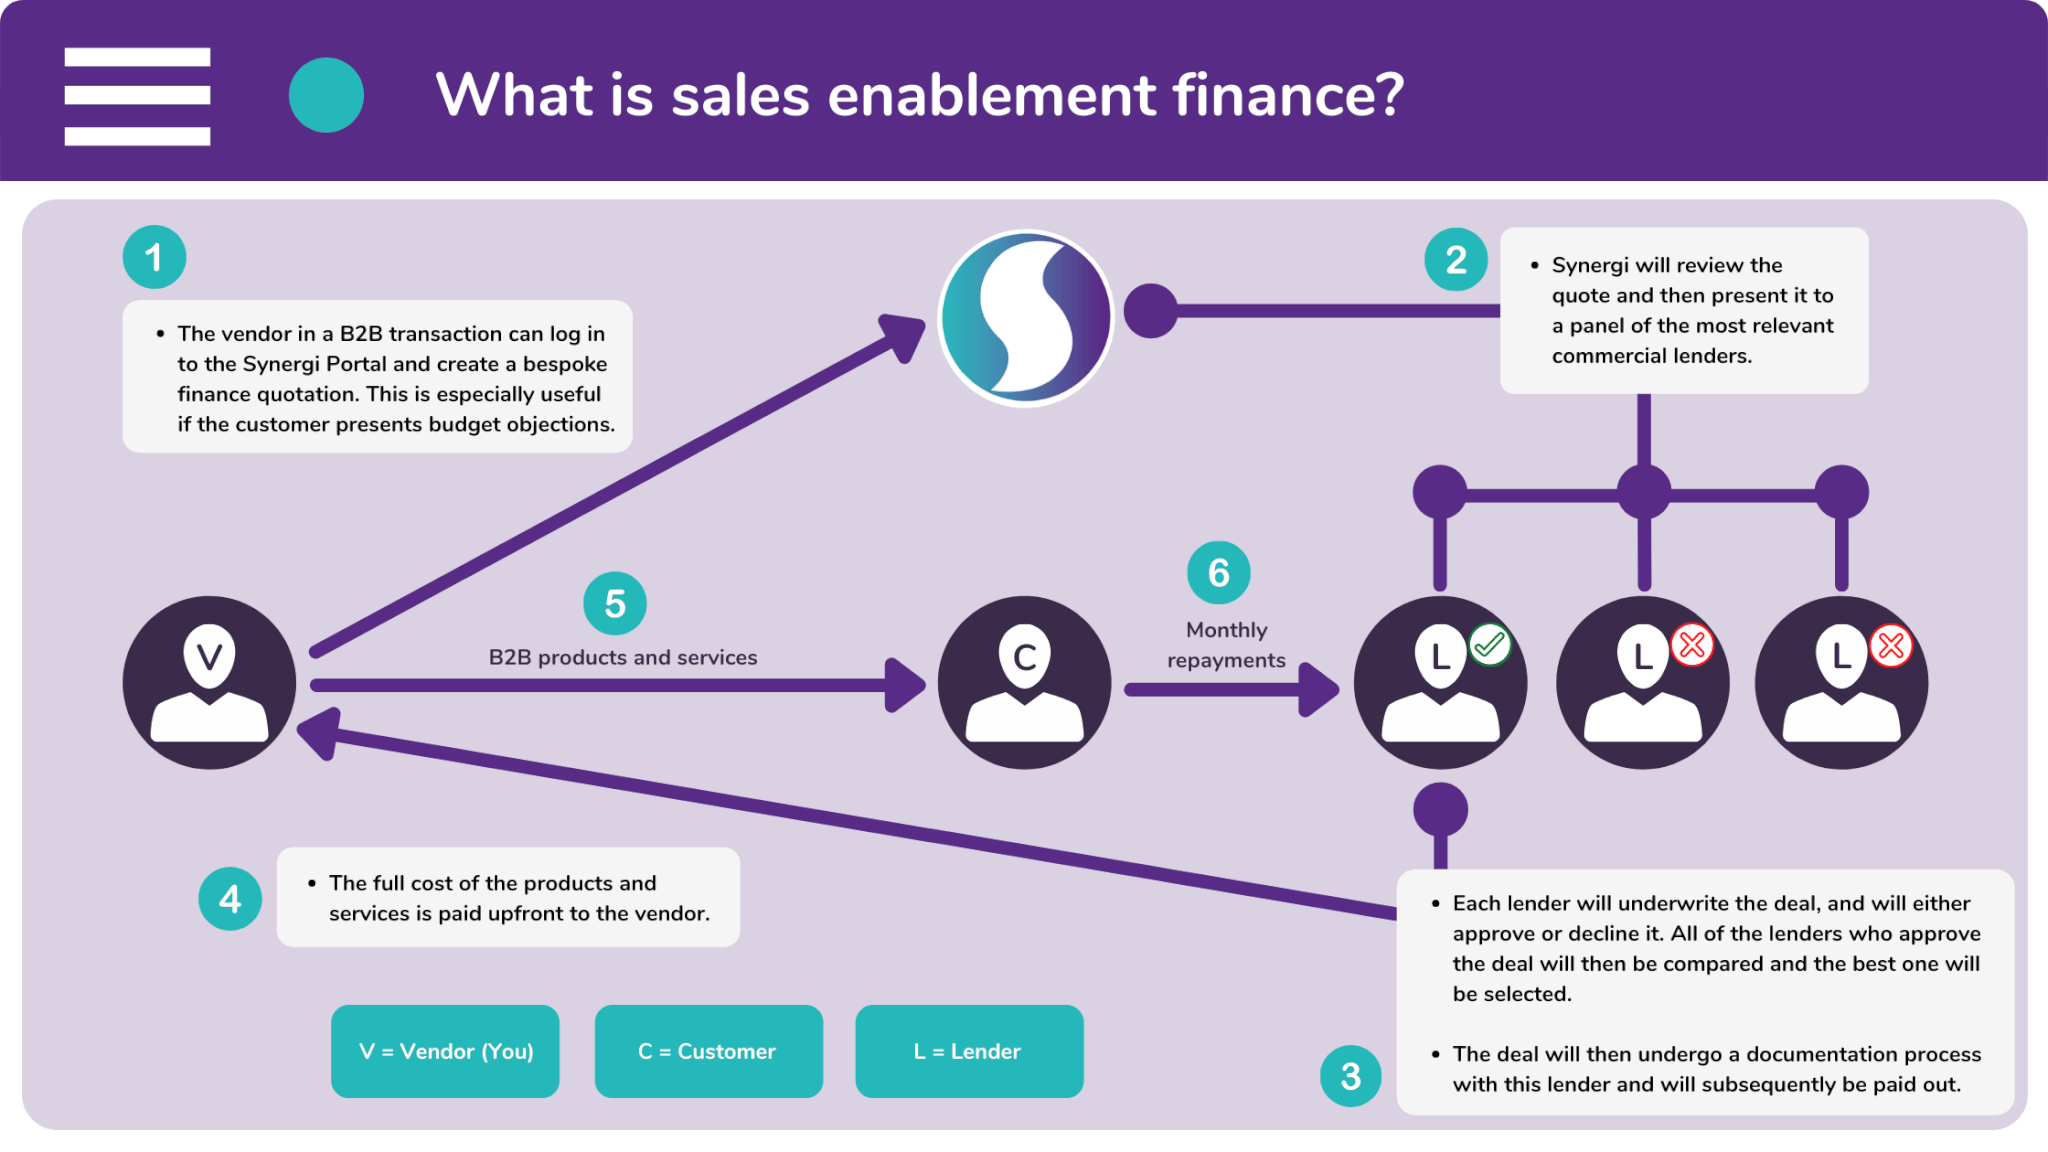 When you sell B2B solutions with sales enablement finance, you get paid in full and upfront. But your customer makes payments on a monthly basis.